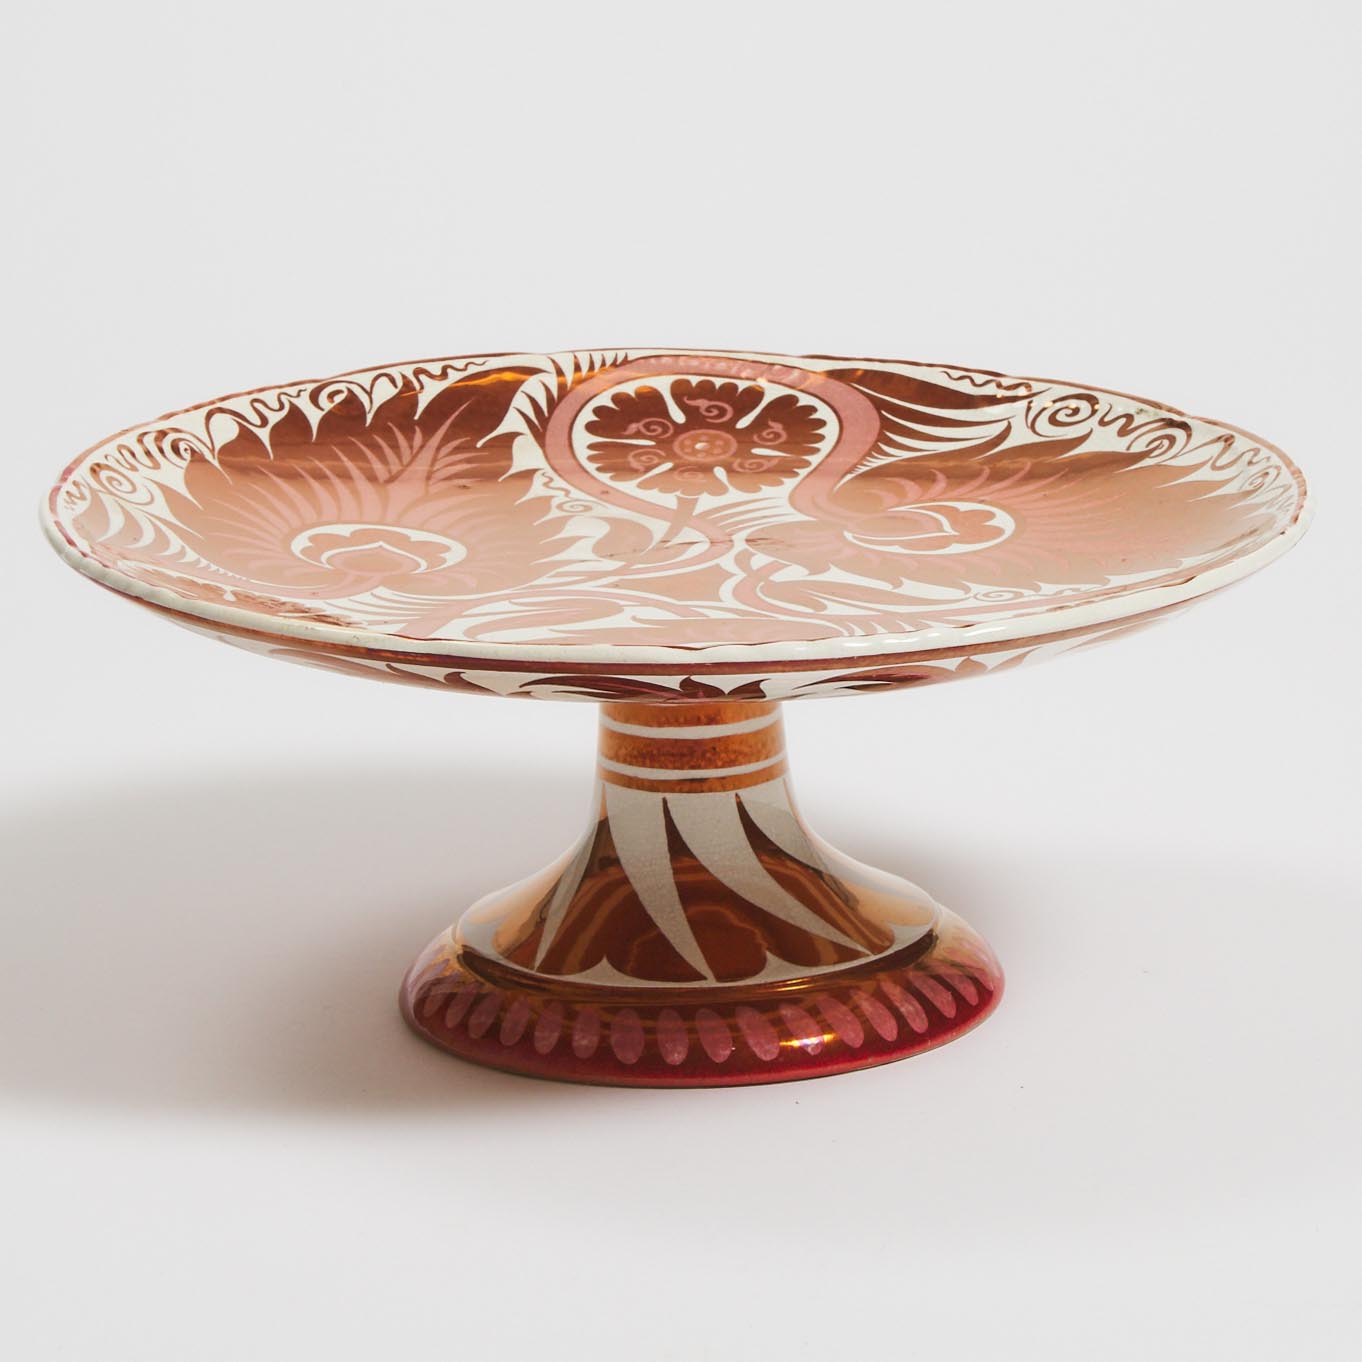 William De Morgan Ruby Lustre Footed Comport, Charles Passenger, c.1900